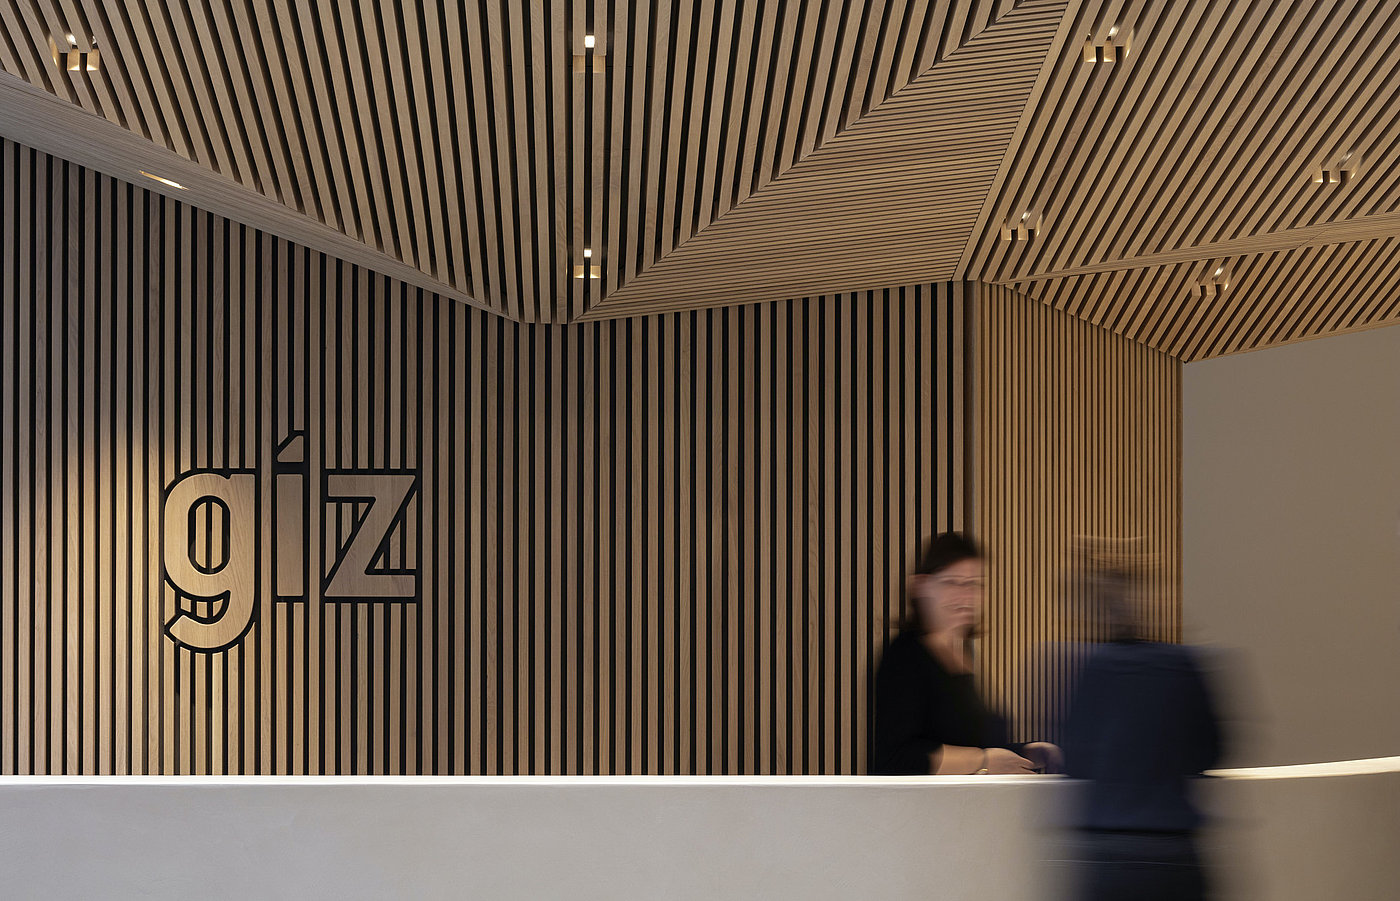 Photo: Reception desk inside a building with the GIZ logo on the wall